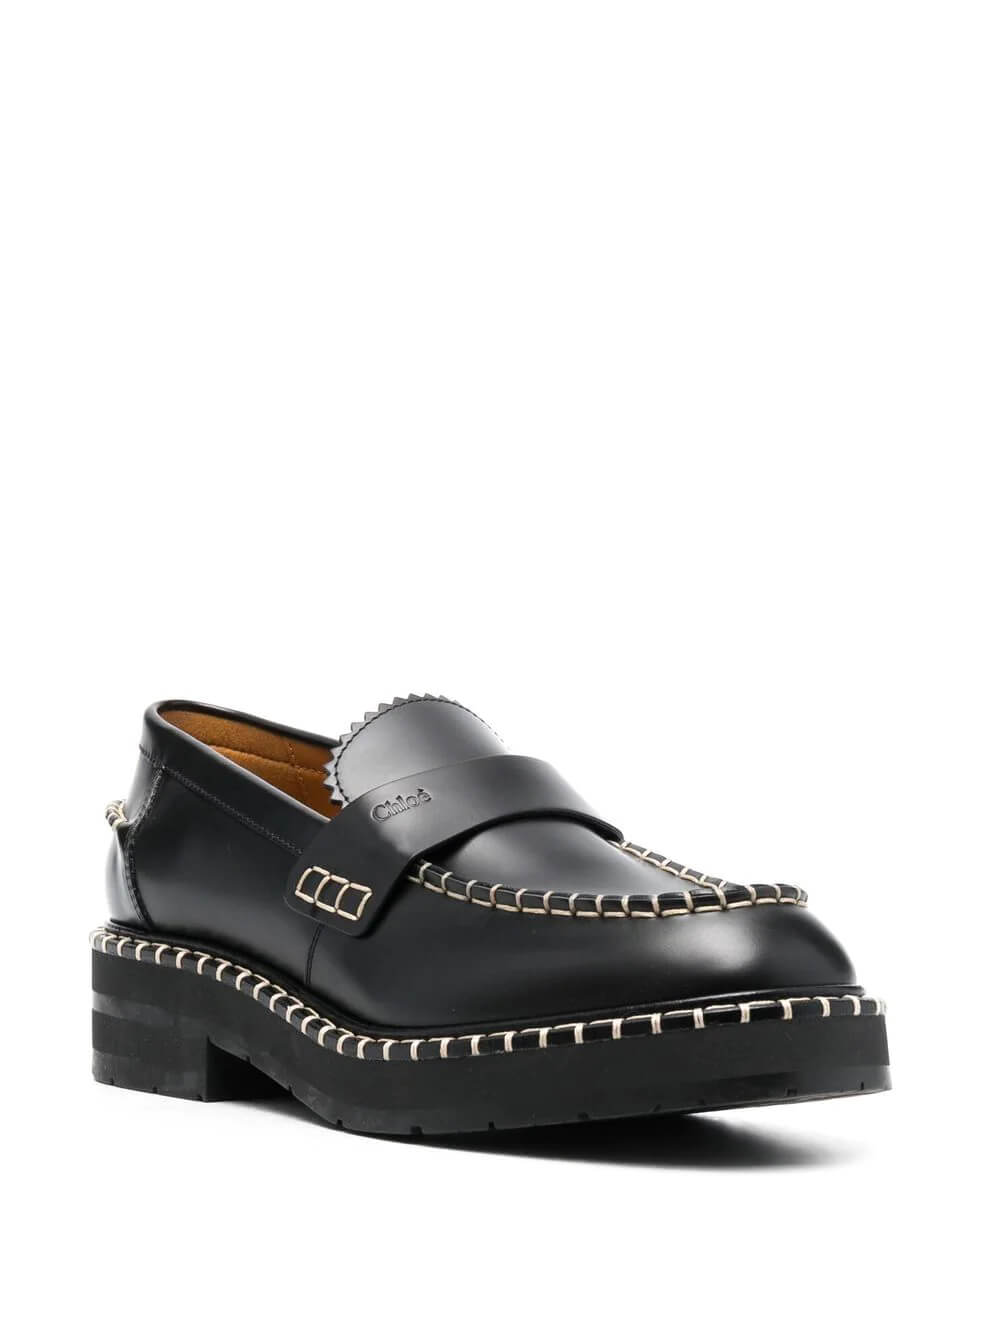 Chloé Noua Loafer in Black available at The New Trend